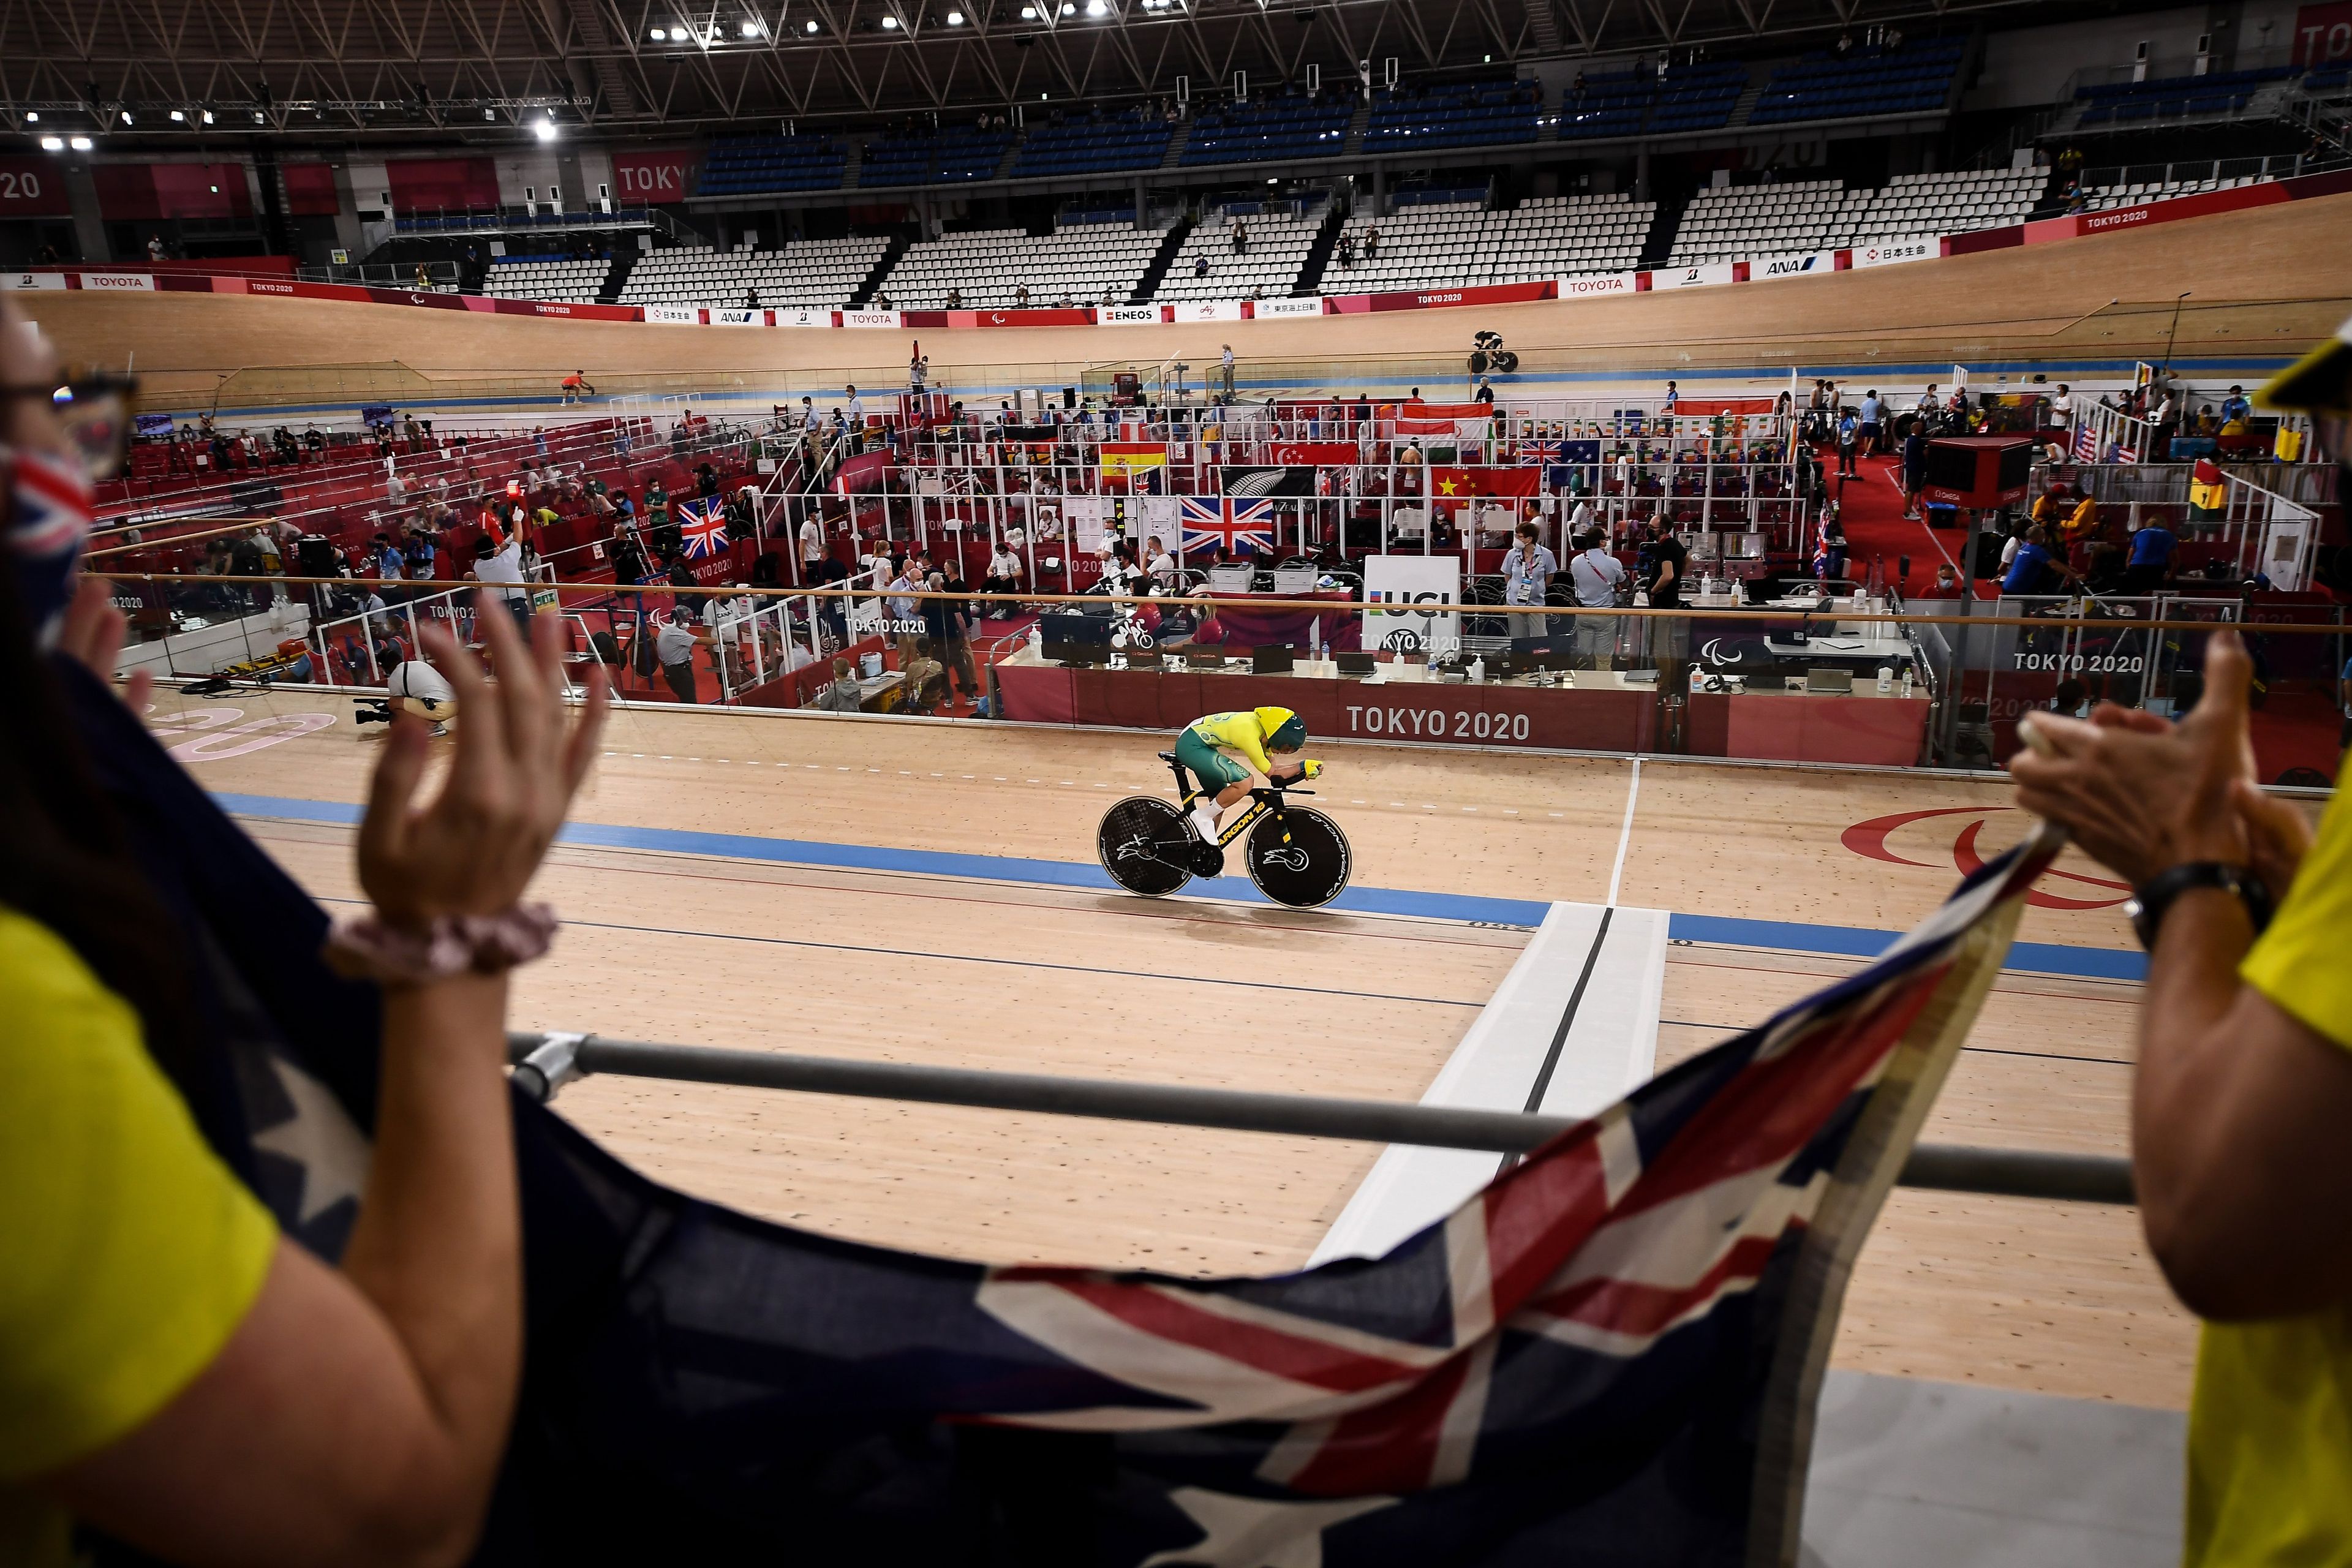 Cyclist Paige Greco claims Australia's first gold medal at Tokyo Paralympics, sets new world record